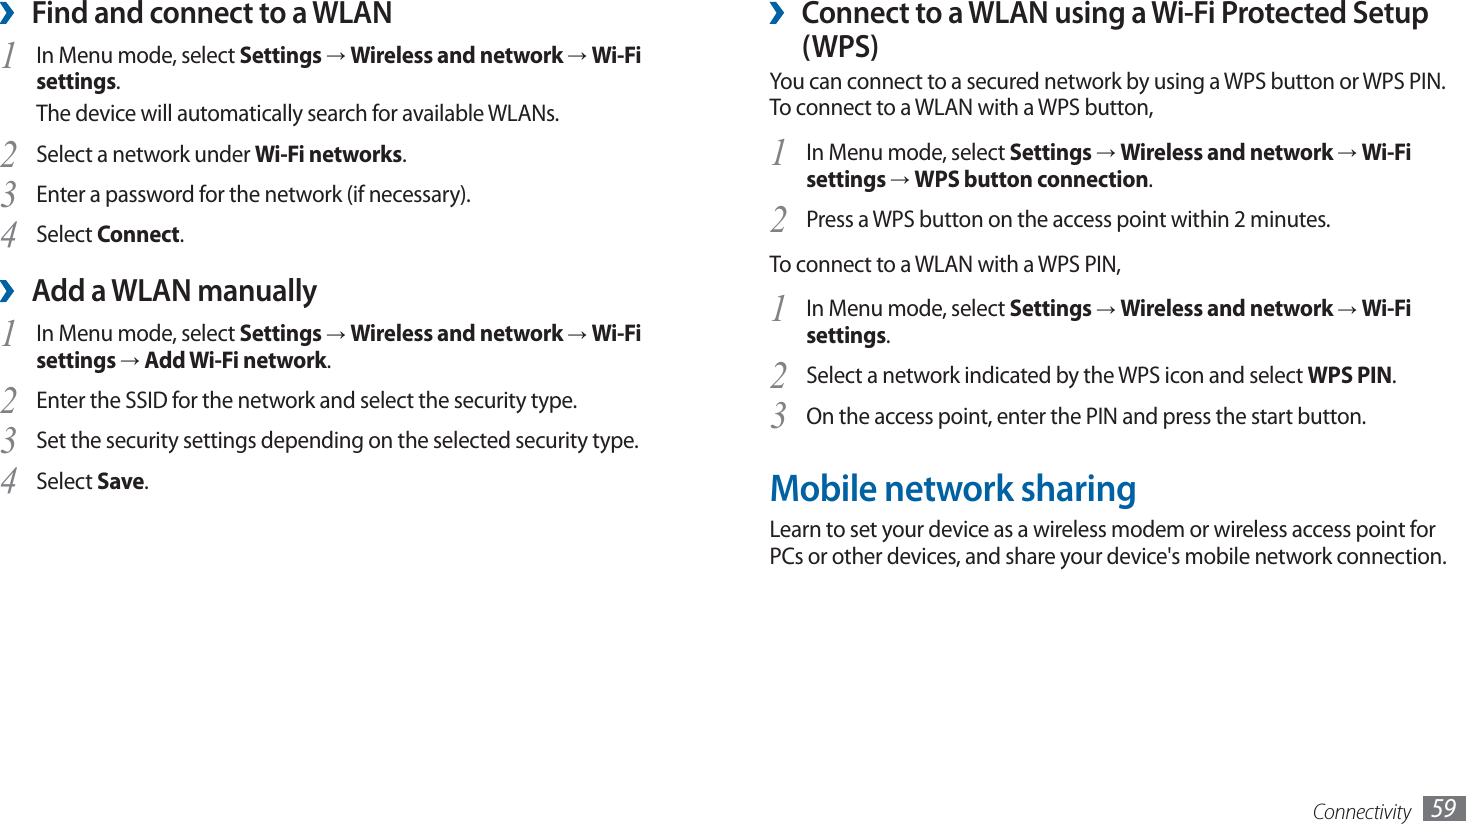 Connectivity 59Connect to a WLAN using a Wi-Fi Protected Setup  ›(WPS)You can connect to a secured network by using a WPS button or WPS PIN. To connect to a WLAN with a WPS button,In Menu mode, select 1 Settings → Wireless and network → Wi-Fi settings → WPS button connection.Press a WPS button on the access point within 2 minutes.2 To connect to a WLAN with a WPS PIN,In Menu mode, select 1 Settings → Wireless and network → Wi-Fi settings. Select a network indicated by the WPS icon and select 2 WPS PIN.On the access point, enter the PIN and press the start button.3 Mobile network sharingLearn to set your device as a wireless modem or wireless access point for PCs or other devices, and share your device&apos;s mobile network connection.Find and connect to a WLAN ›In Menu mode, select 1 Settings → Wireless and network → Wi-Fi settings. The device will automatically search for available WLANs. Select a network under 2 Wi-Fi networks.Enter a password for the network (if necessary).3 Select 4 Connect.Add a WLAN manually ›In Menu mode, select 1 Settings → Wireless and network → Wi-Fi settings → Add Wi-Fi network.Enter the SSID for the network and select the security type. 2 Set the security settings depending on the selected security type.3 Select 4 Save.